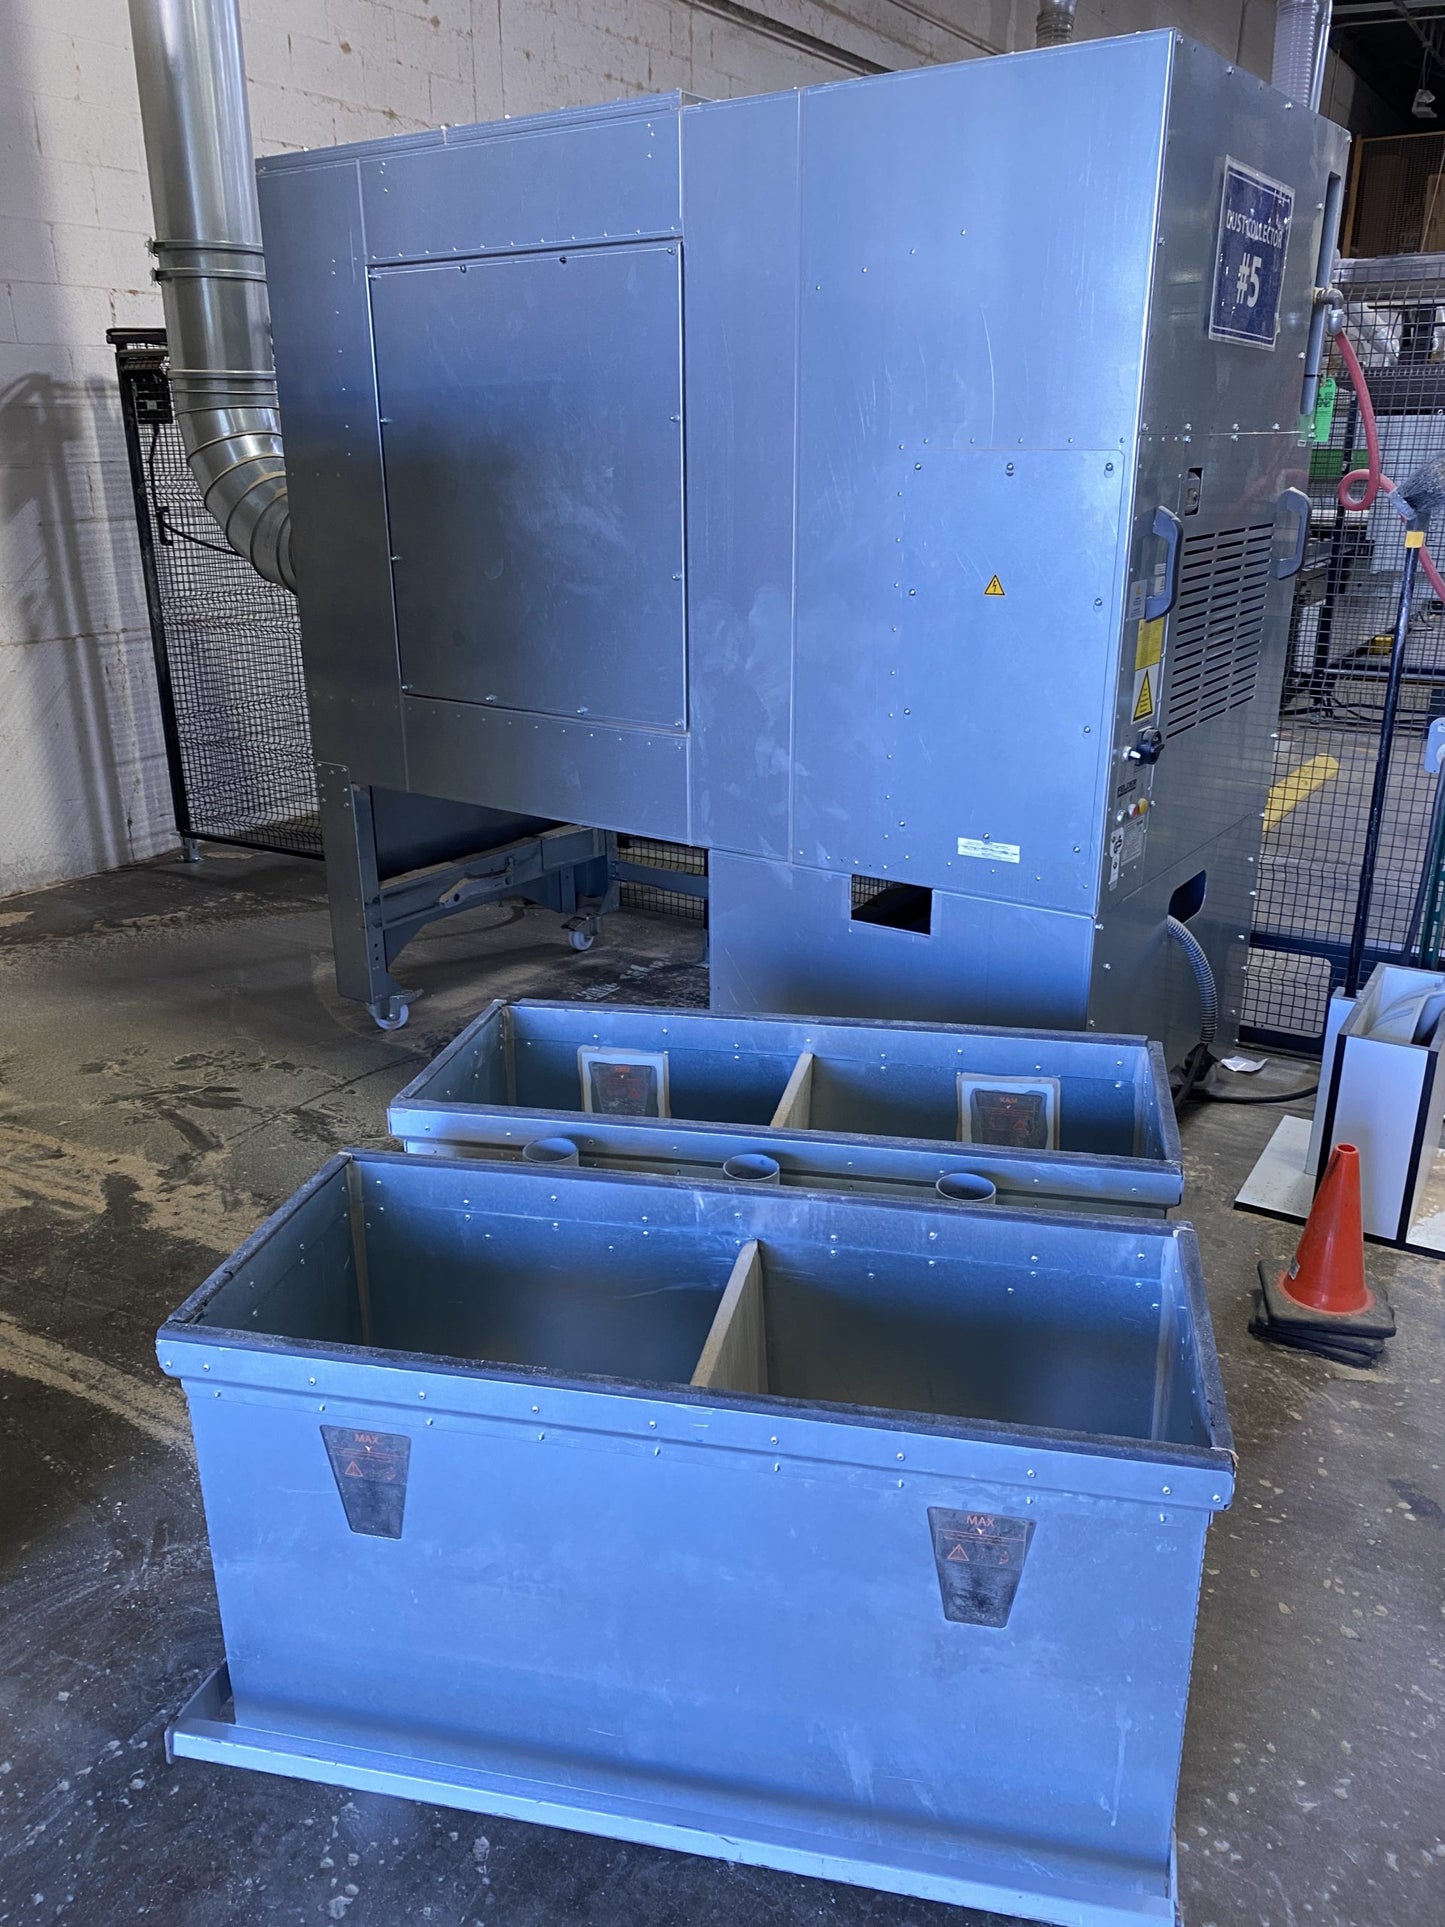 Felder Dust Collectors with Dump Bins and Fire Suppression – 2 AVAILABLE!